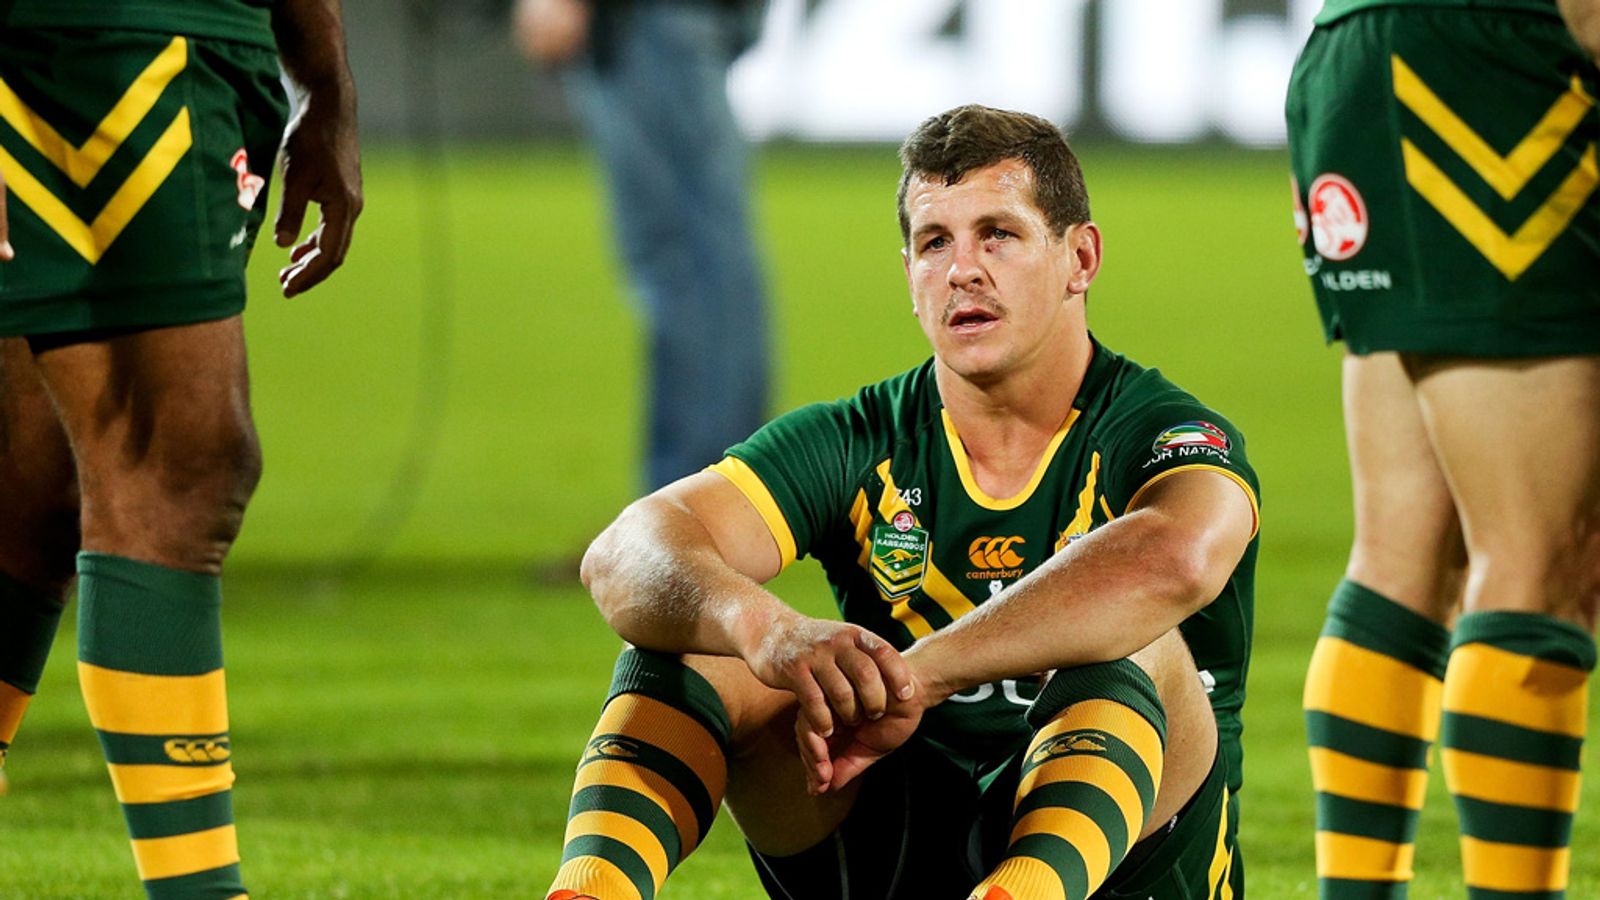 NRL: Greg Bird stripped of Gold Coast Titans captaincy, Rugby League News